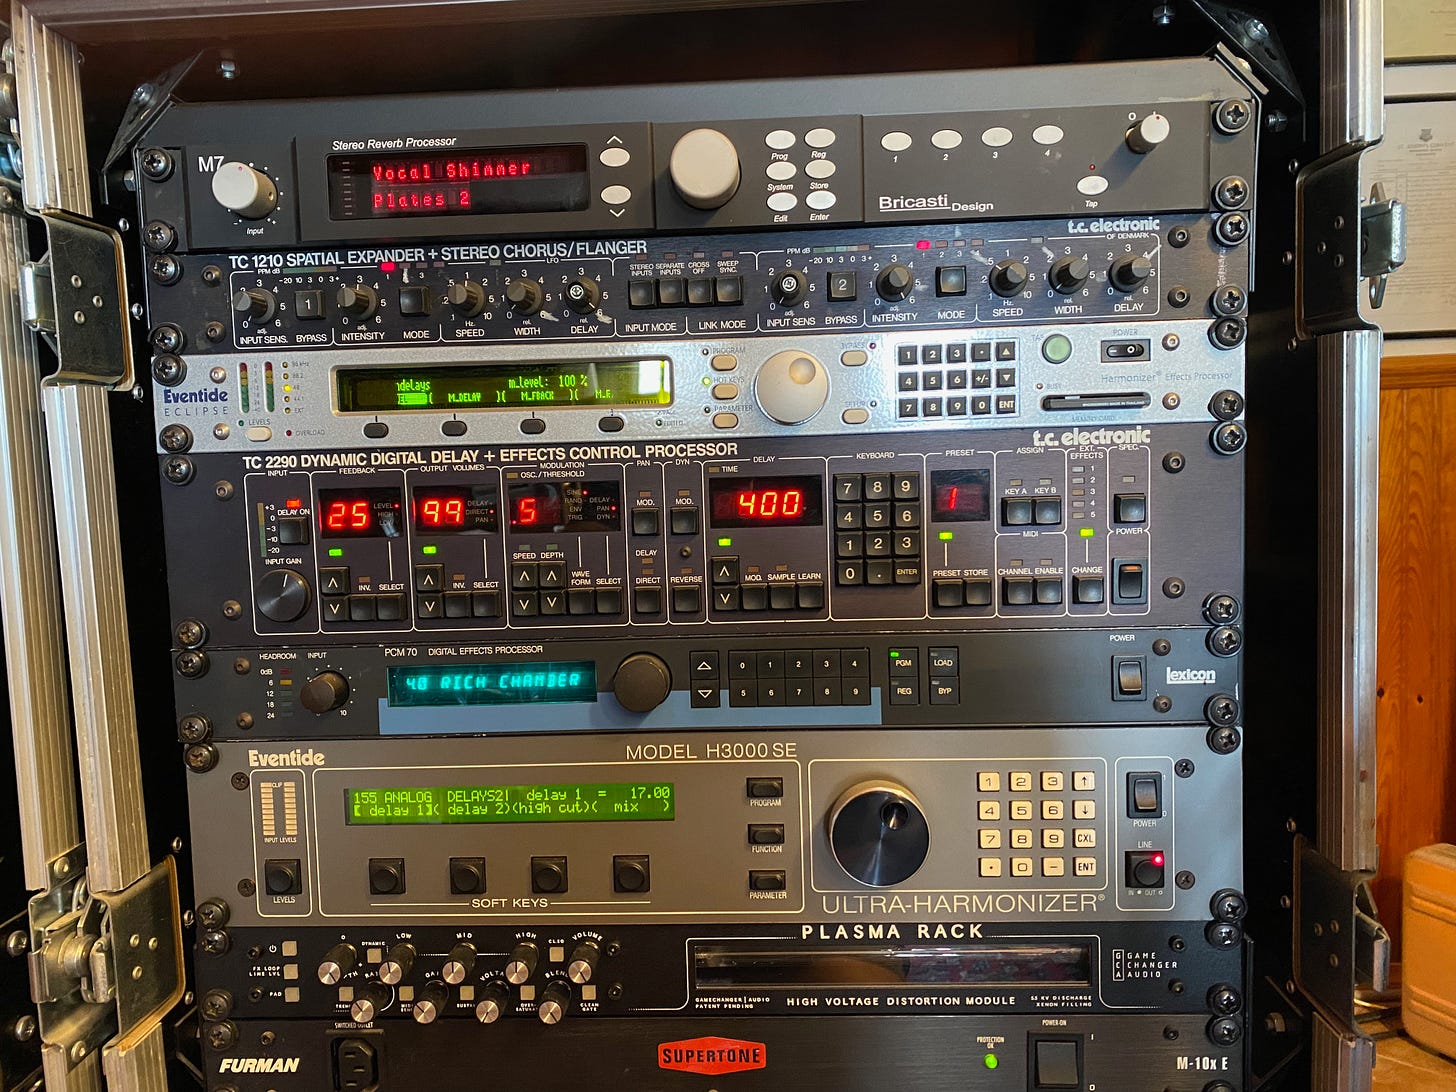 The Supertone Records studio stash of time base effects featuring the Eventide Eclipse and H3000SE